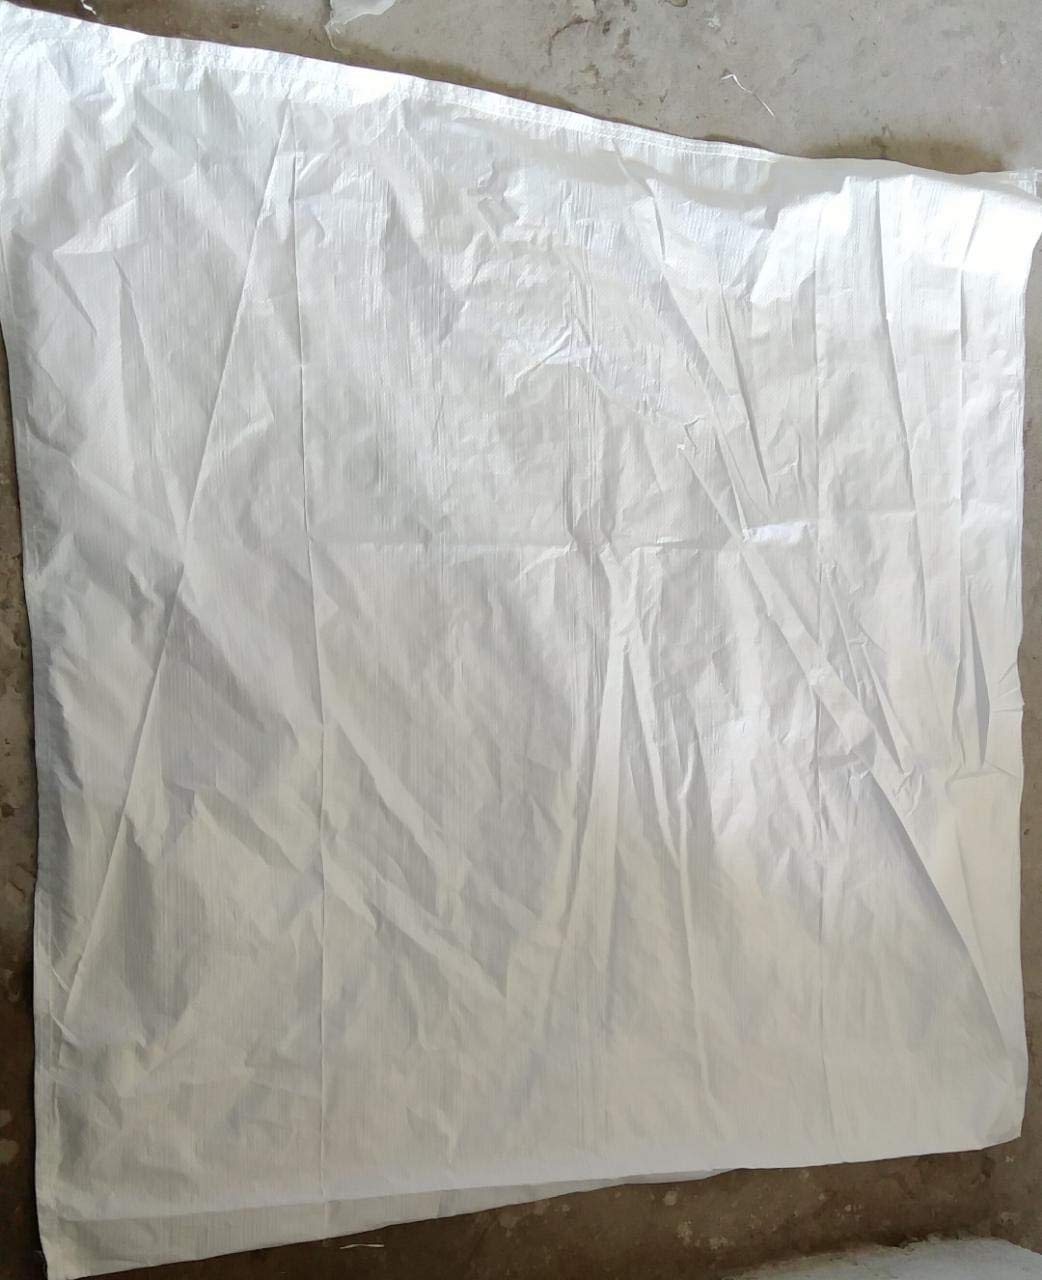 Empty White Big Bora, Large HDPE Bori for Packing of Food, bori Bags Packing Parcels Goods Items (Size 60x65 Inch) (Pack of 10) (48x60 Inch, Set Of 10)